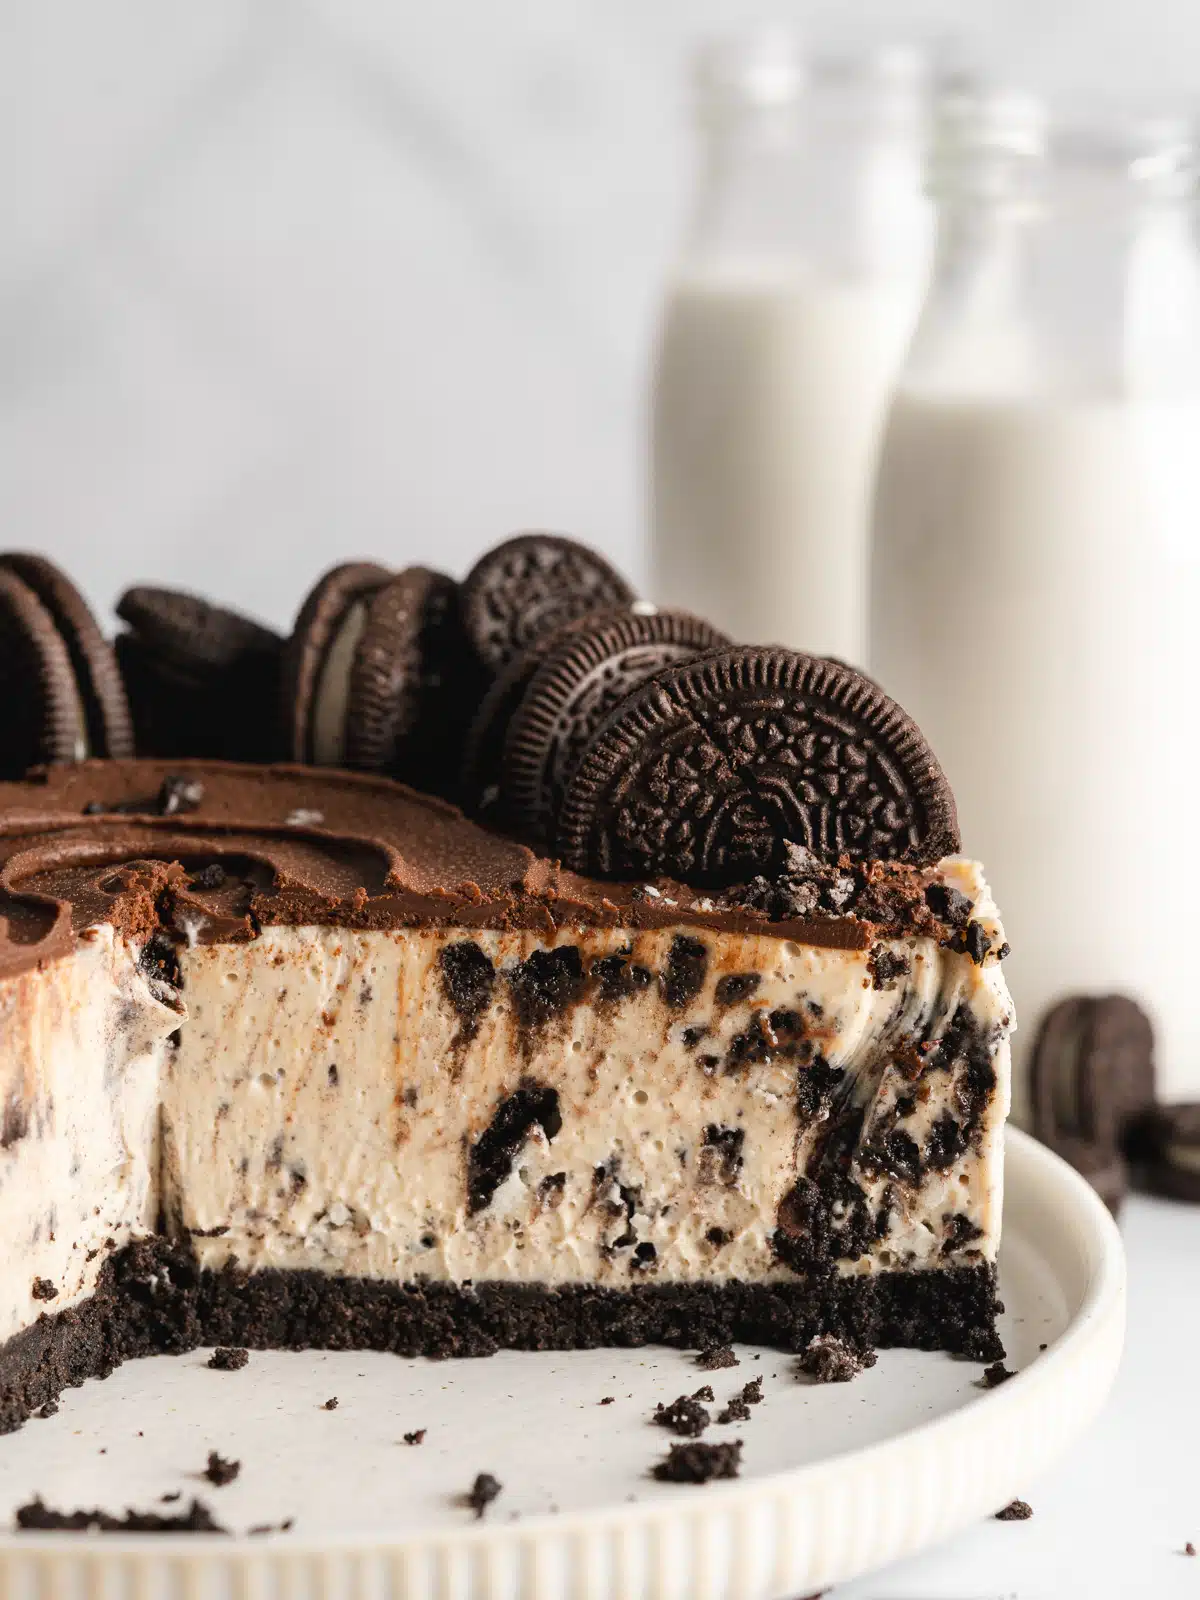 oreo cheesecake with oreo topping and creamy cookie filling and 2 milk bottles in the background.